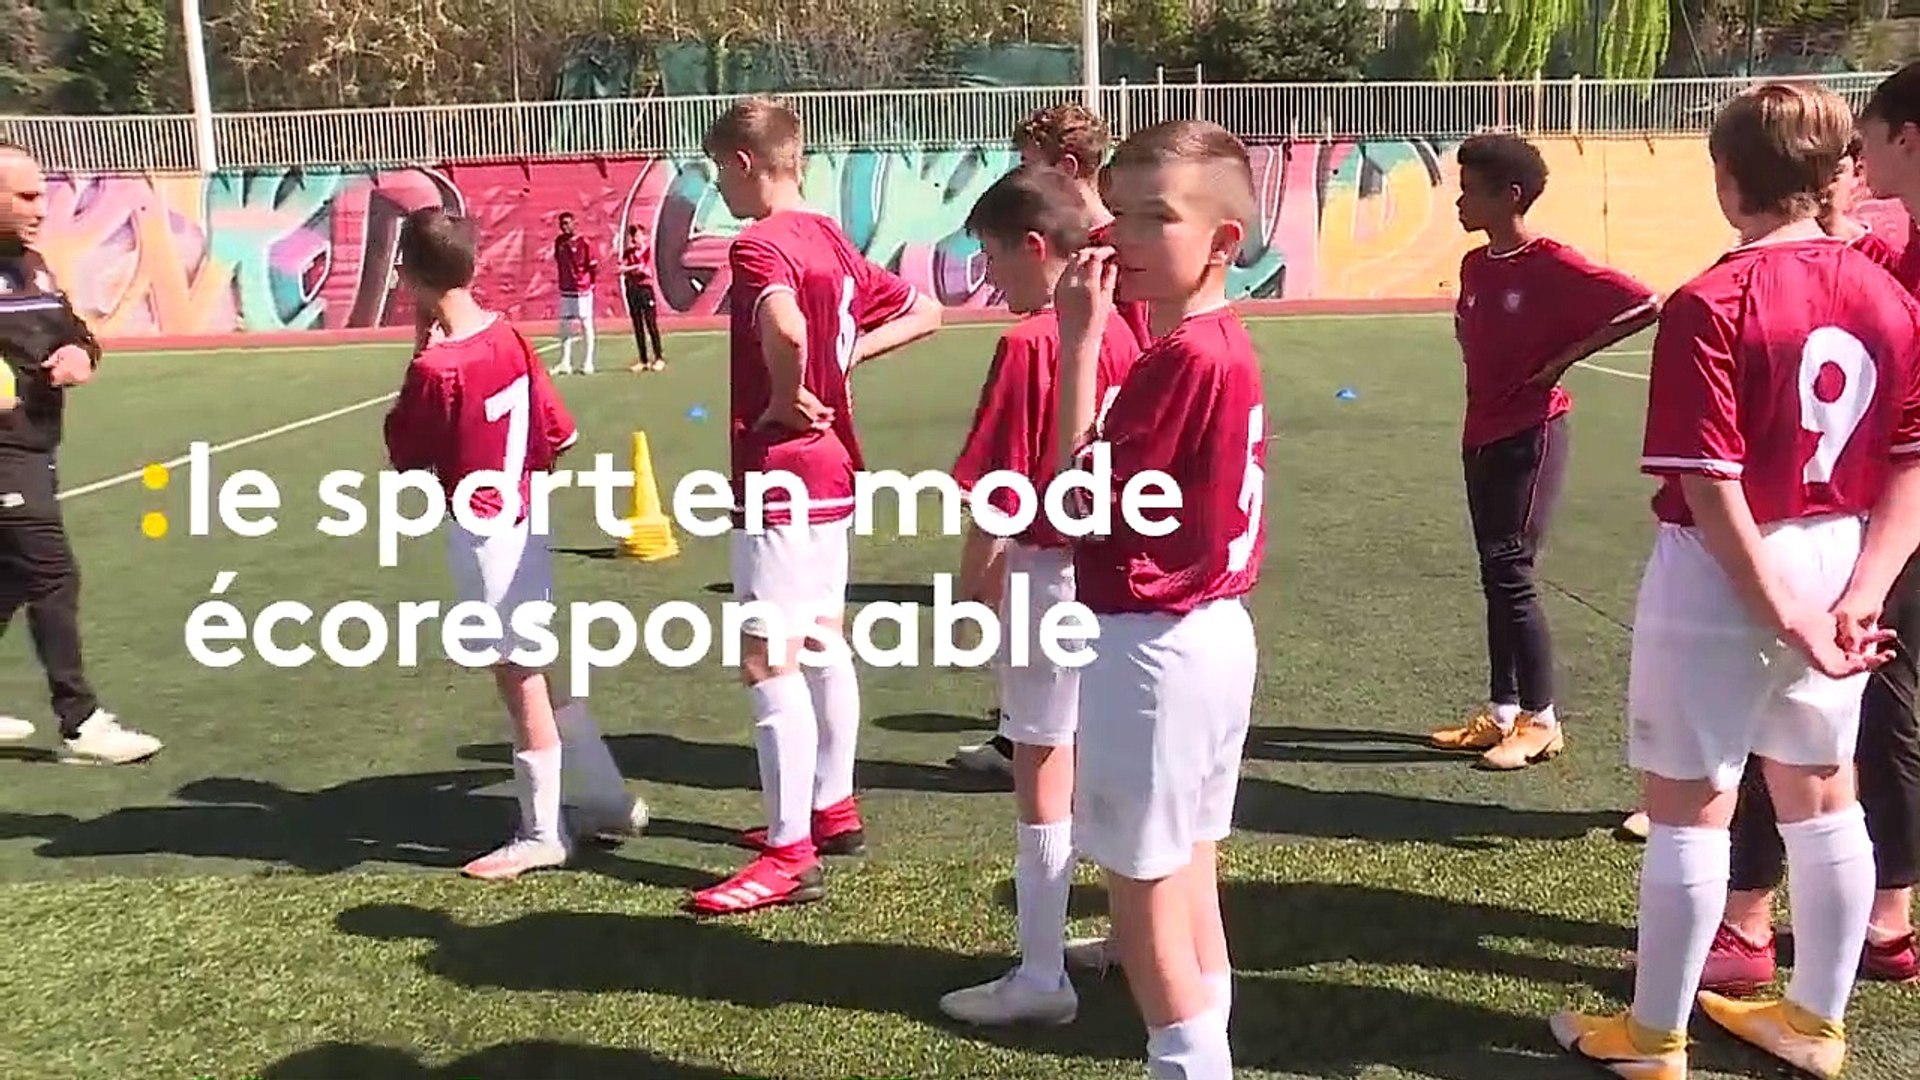 Des maillots de foot made in France 100% recyclés et recyclables - Vidéo  Dailymotion